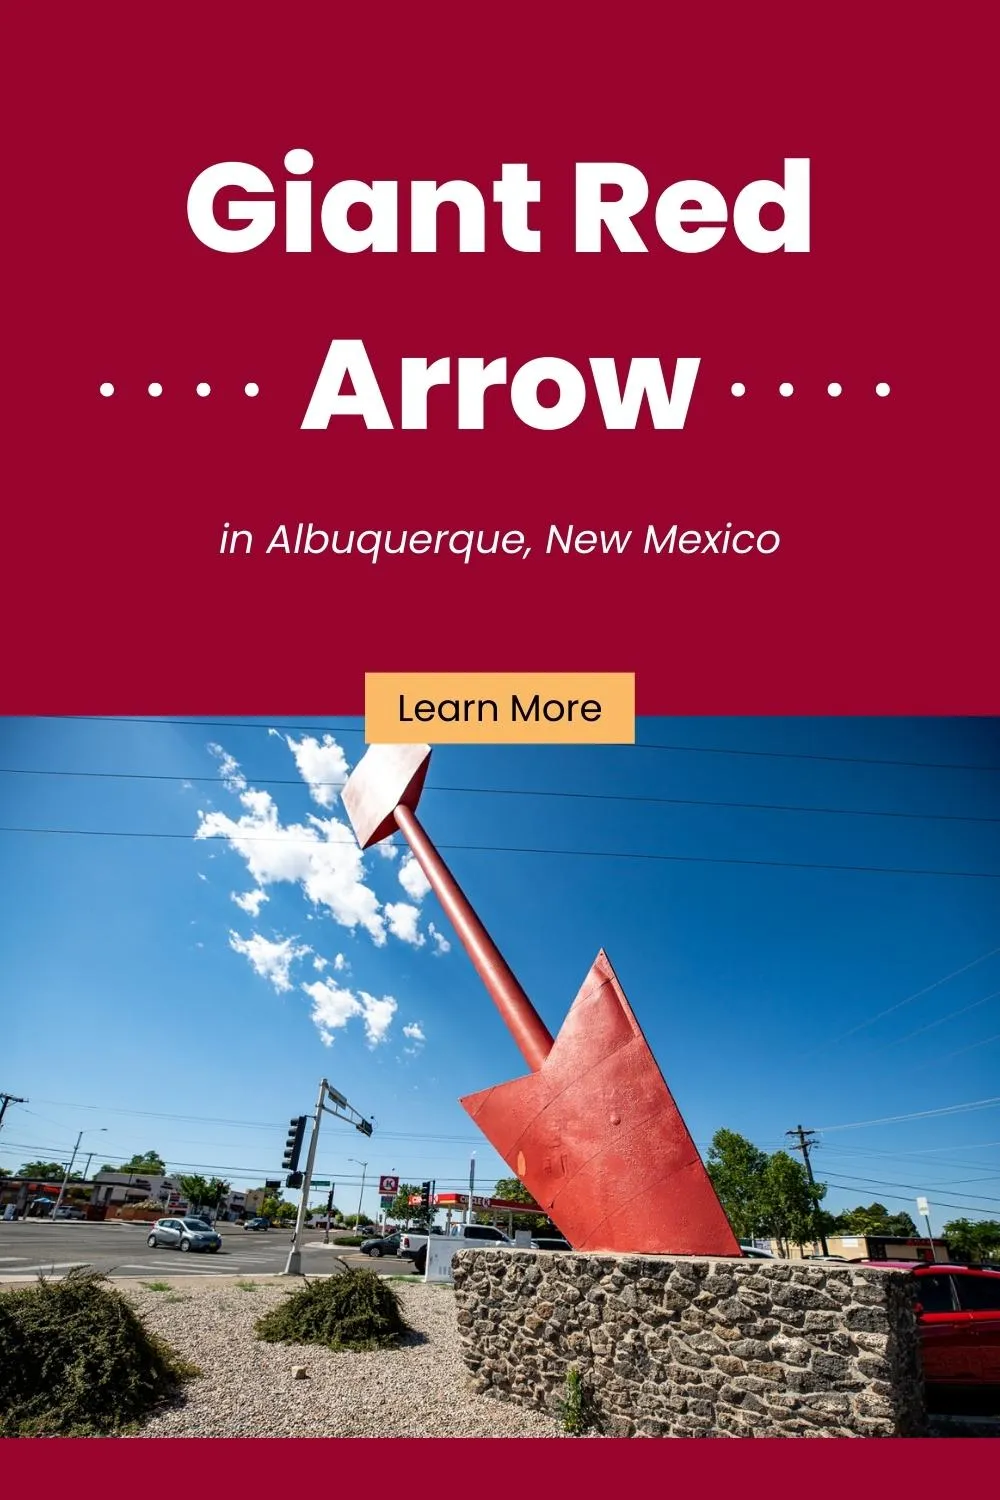 Let me get to the point: the Giant Red Arrow in Albuquerque, New Mexico is a must-stop roadside attraction on your Route 66 road trip. It's been enticing travelers from the road since the 1960s. Visit this weird roadside attraction on a New Mexico road trip - add it to your travel itinerary and bucket list. #RoadTrip #NewMexico #NewMexicoRoadTrip #NewMexicoRoadsideAttraction #RoadsideAttractions #Route66RoadsideAttraction #Route66RoadTrip #Route66